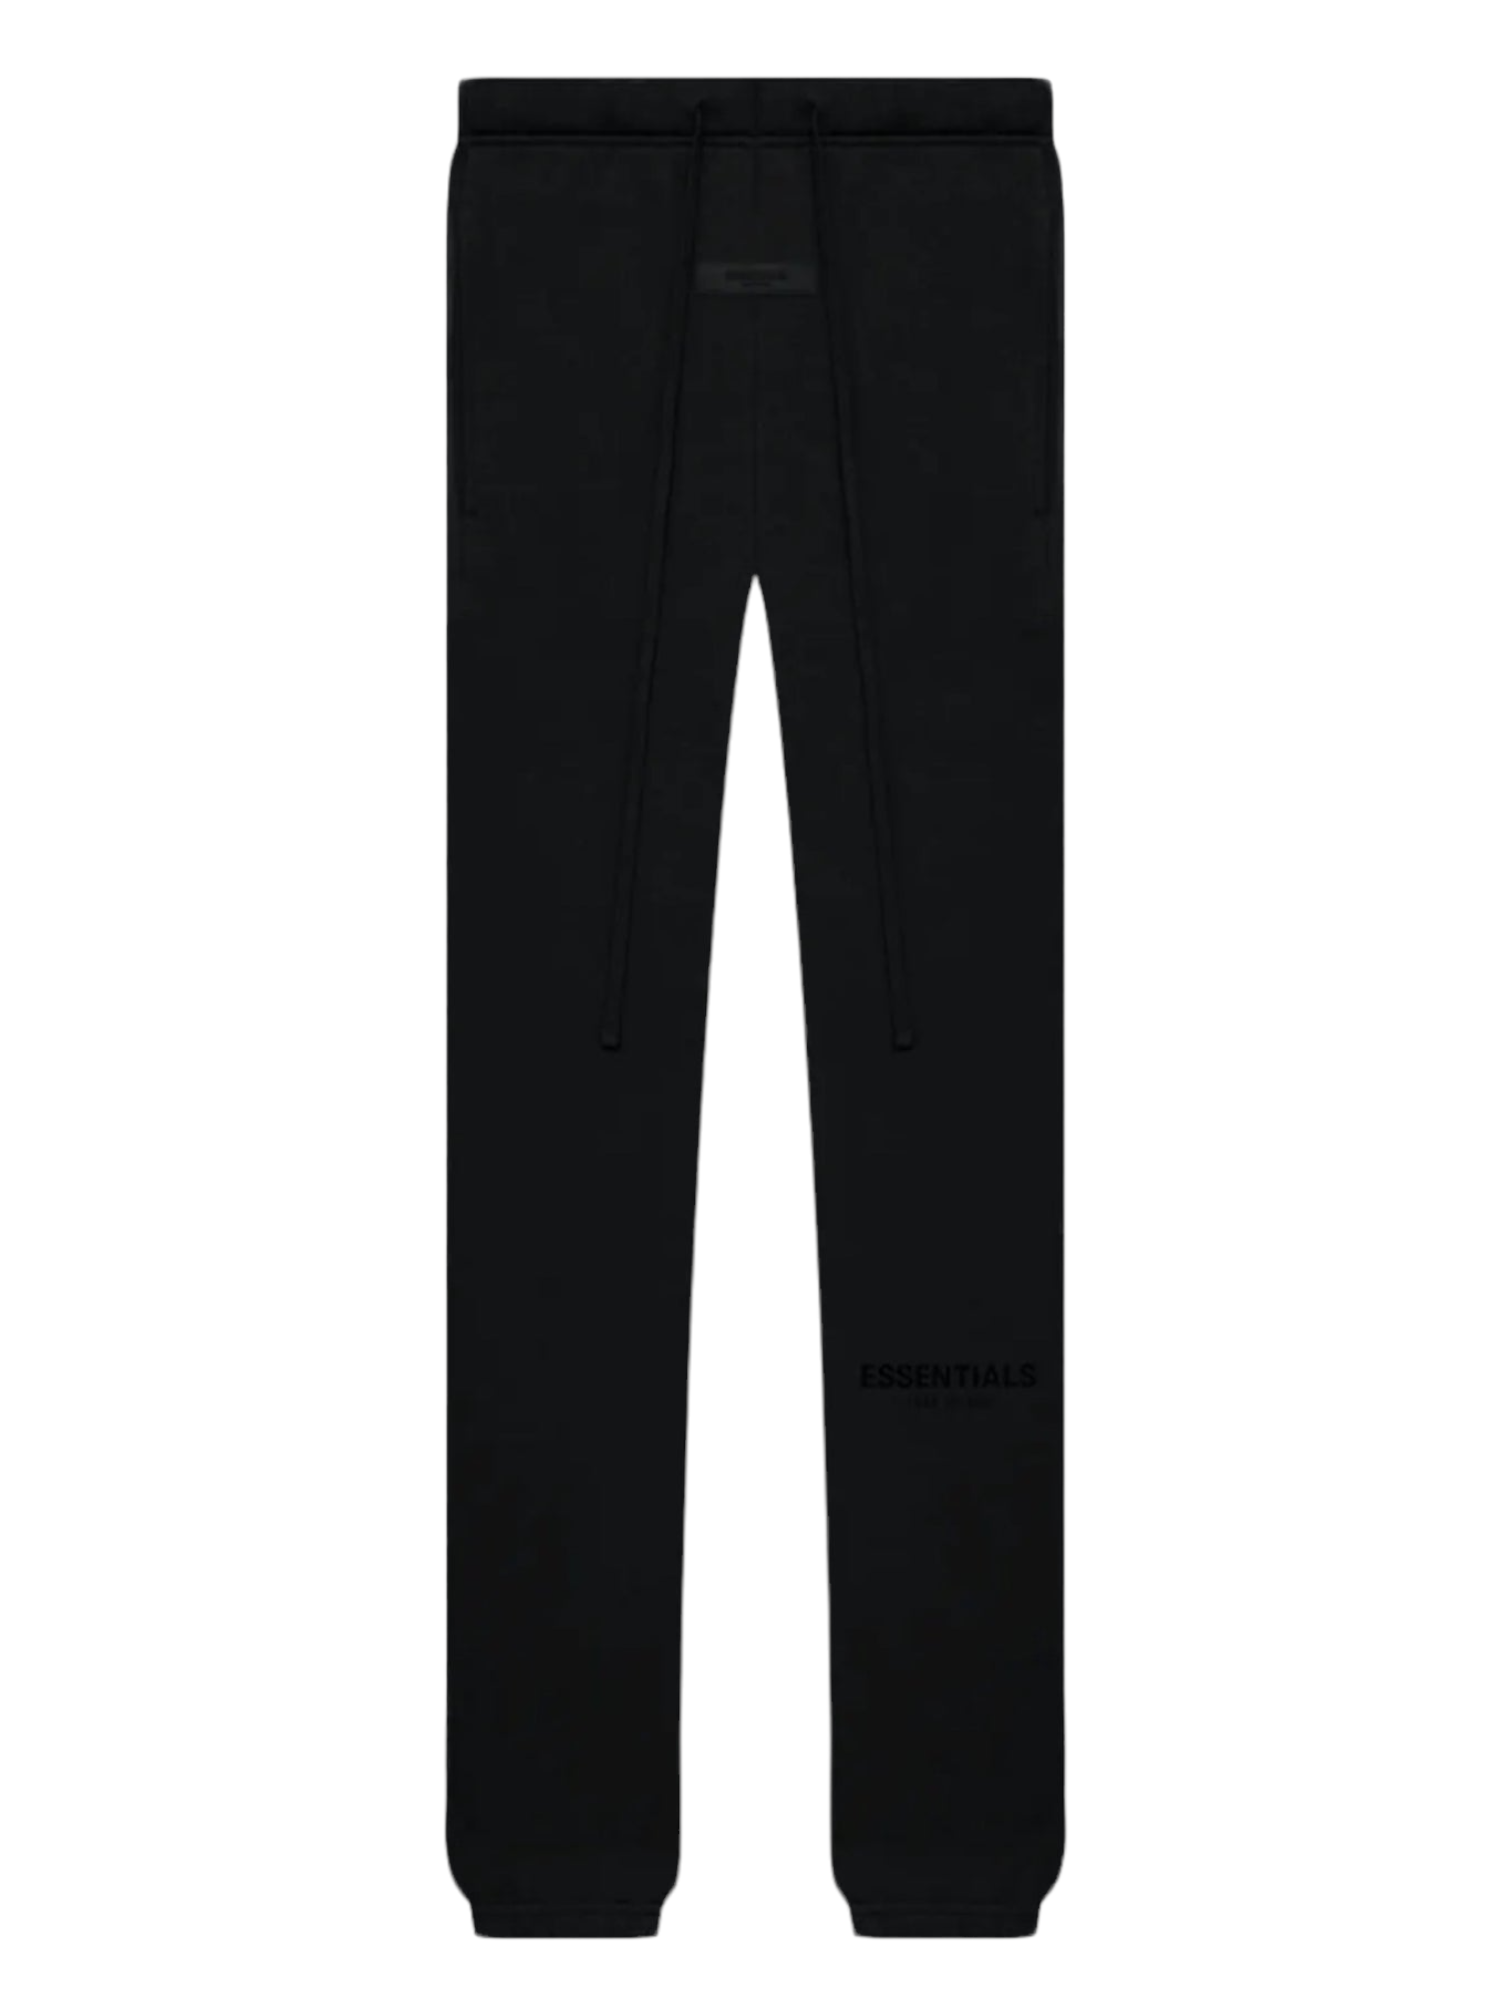 Essentials Fear of God Black Sweatpants — Genuine Design Luxury Consignment Calgary, Alberta, Canada New & Pre-Owned Clothing, Shoes, Accessories.